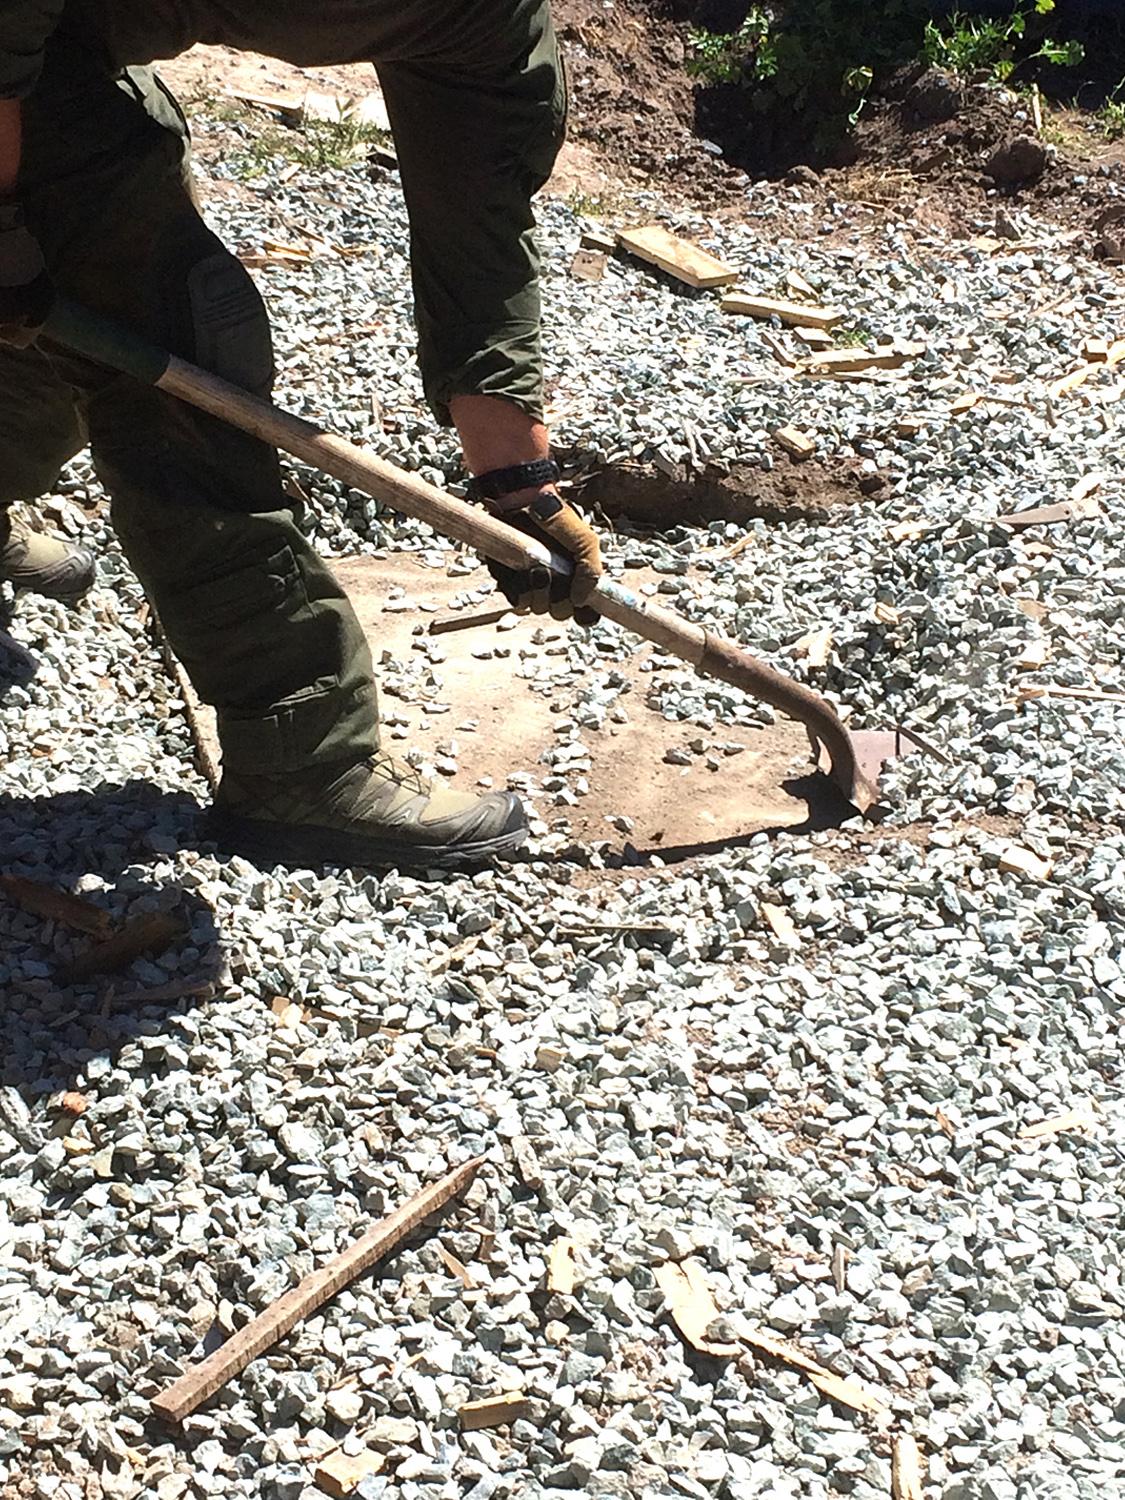 Agent clears rocks away from a wood plank covering the tunnel opening